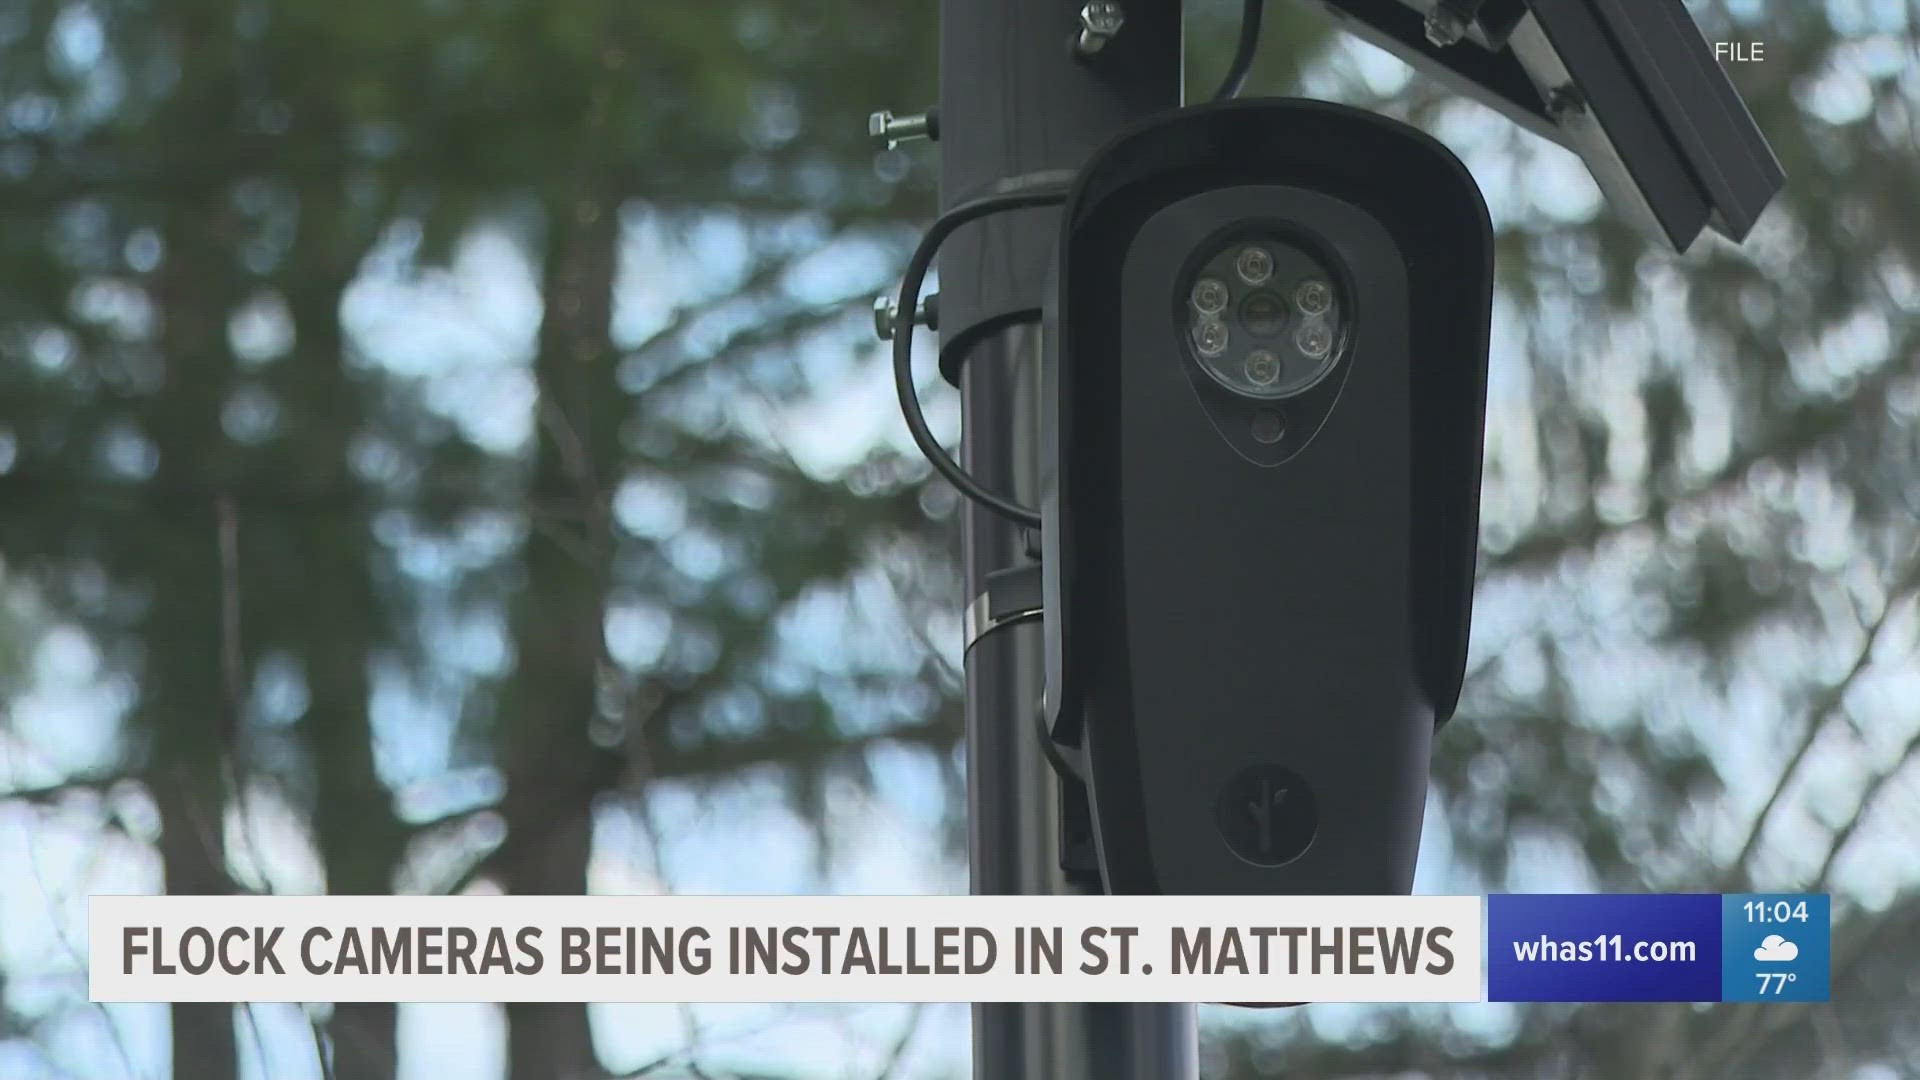 St. Matthews Police Chief Barry Wilkerson believes the license plate readers will lead to quicker arrests, closed cases and fewer high-speed chases.